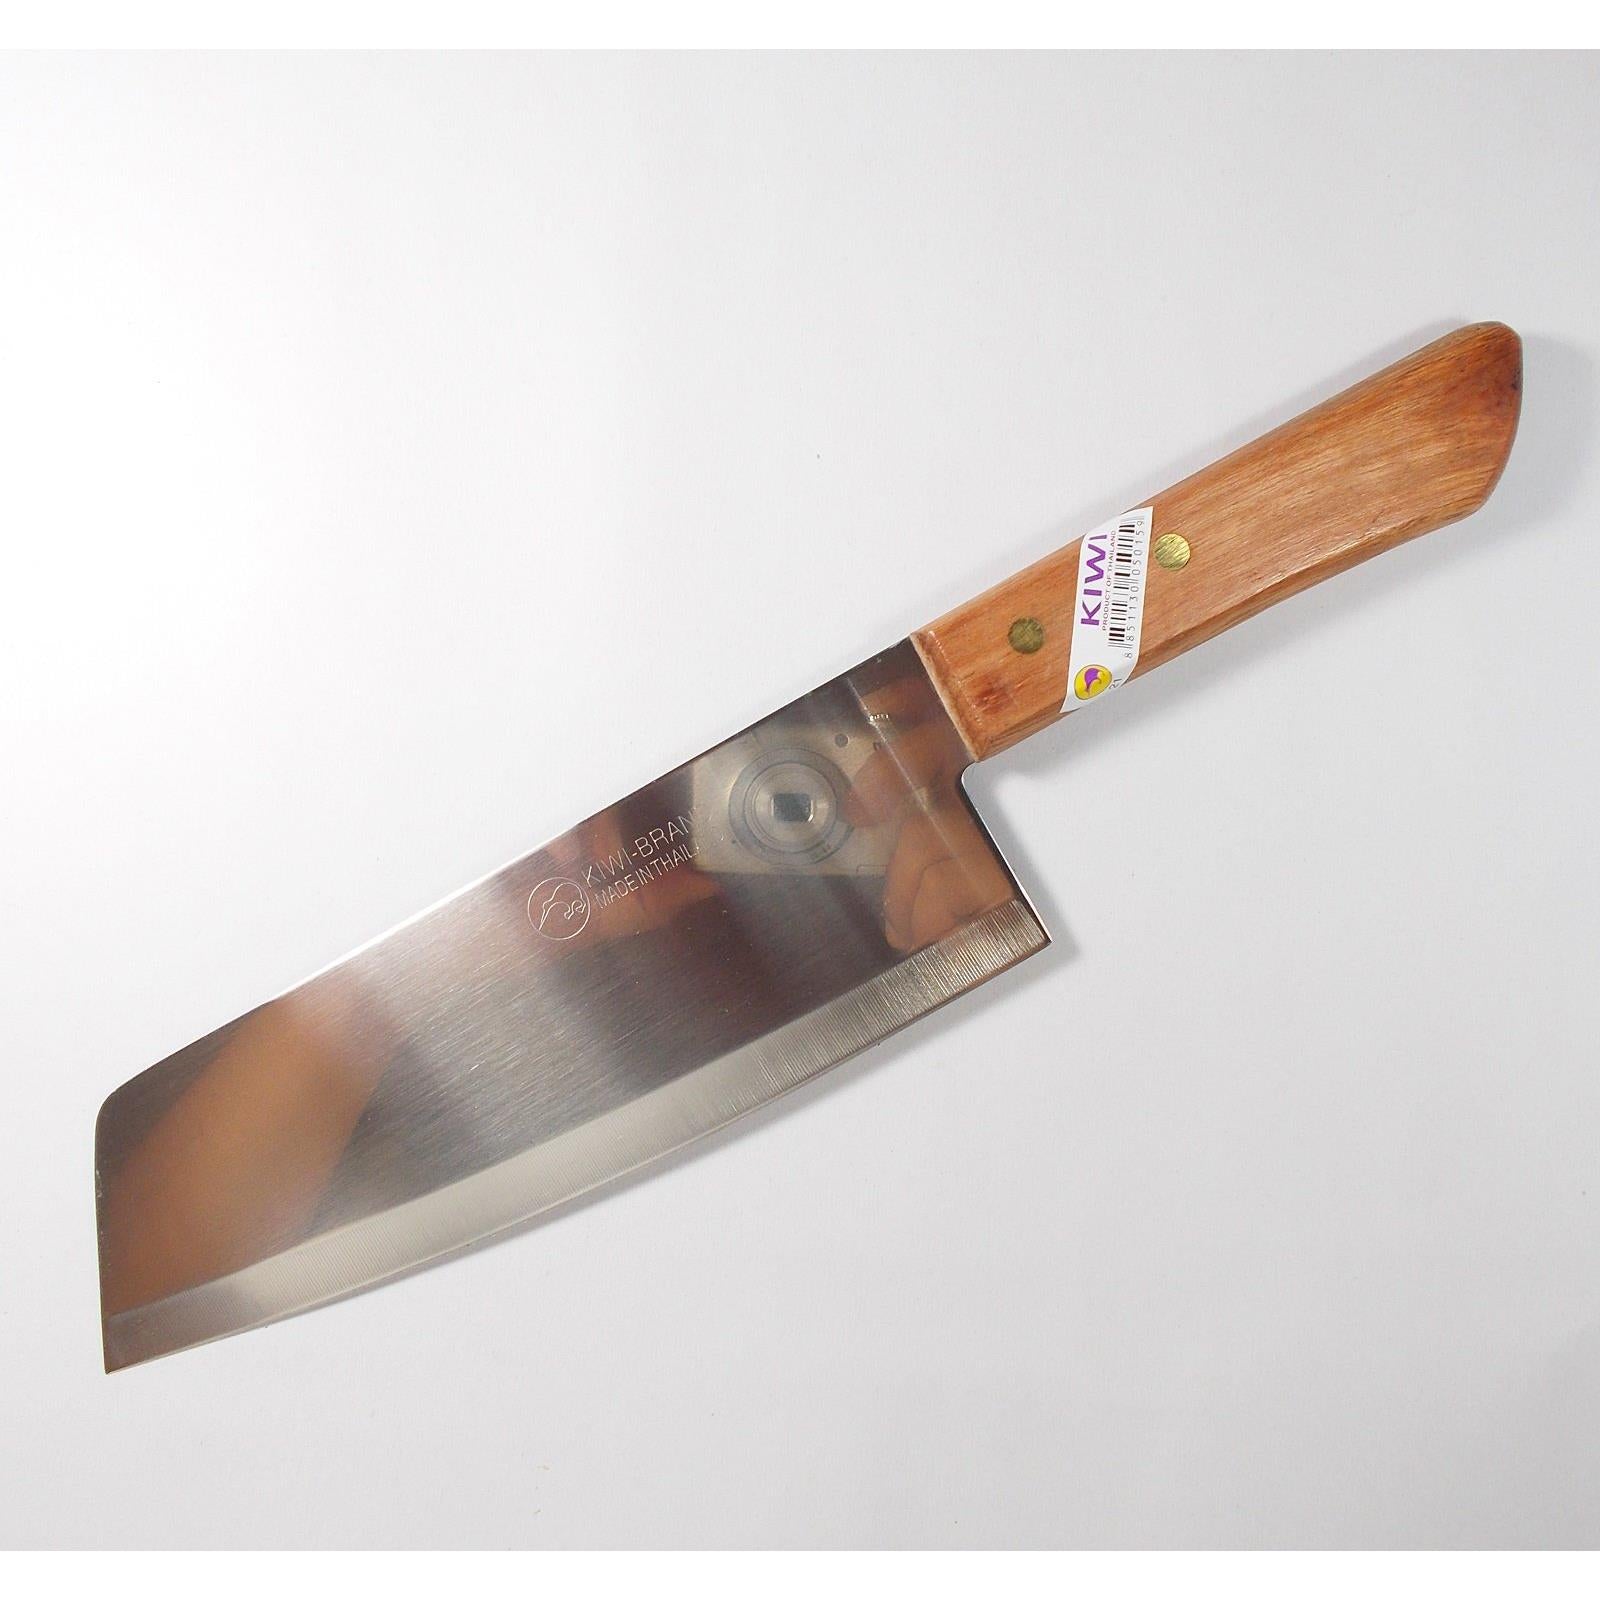 Chef's Knife Cook Knives KIWI Brand 21 Utility Thai Cutlery Steak Wood Handle Kitchen Sharp Blade 7.5" Stainless Steel